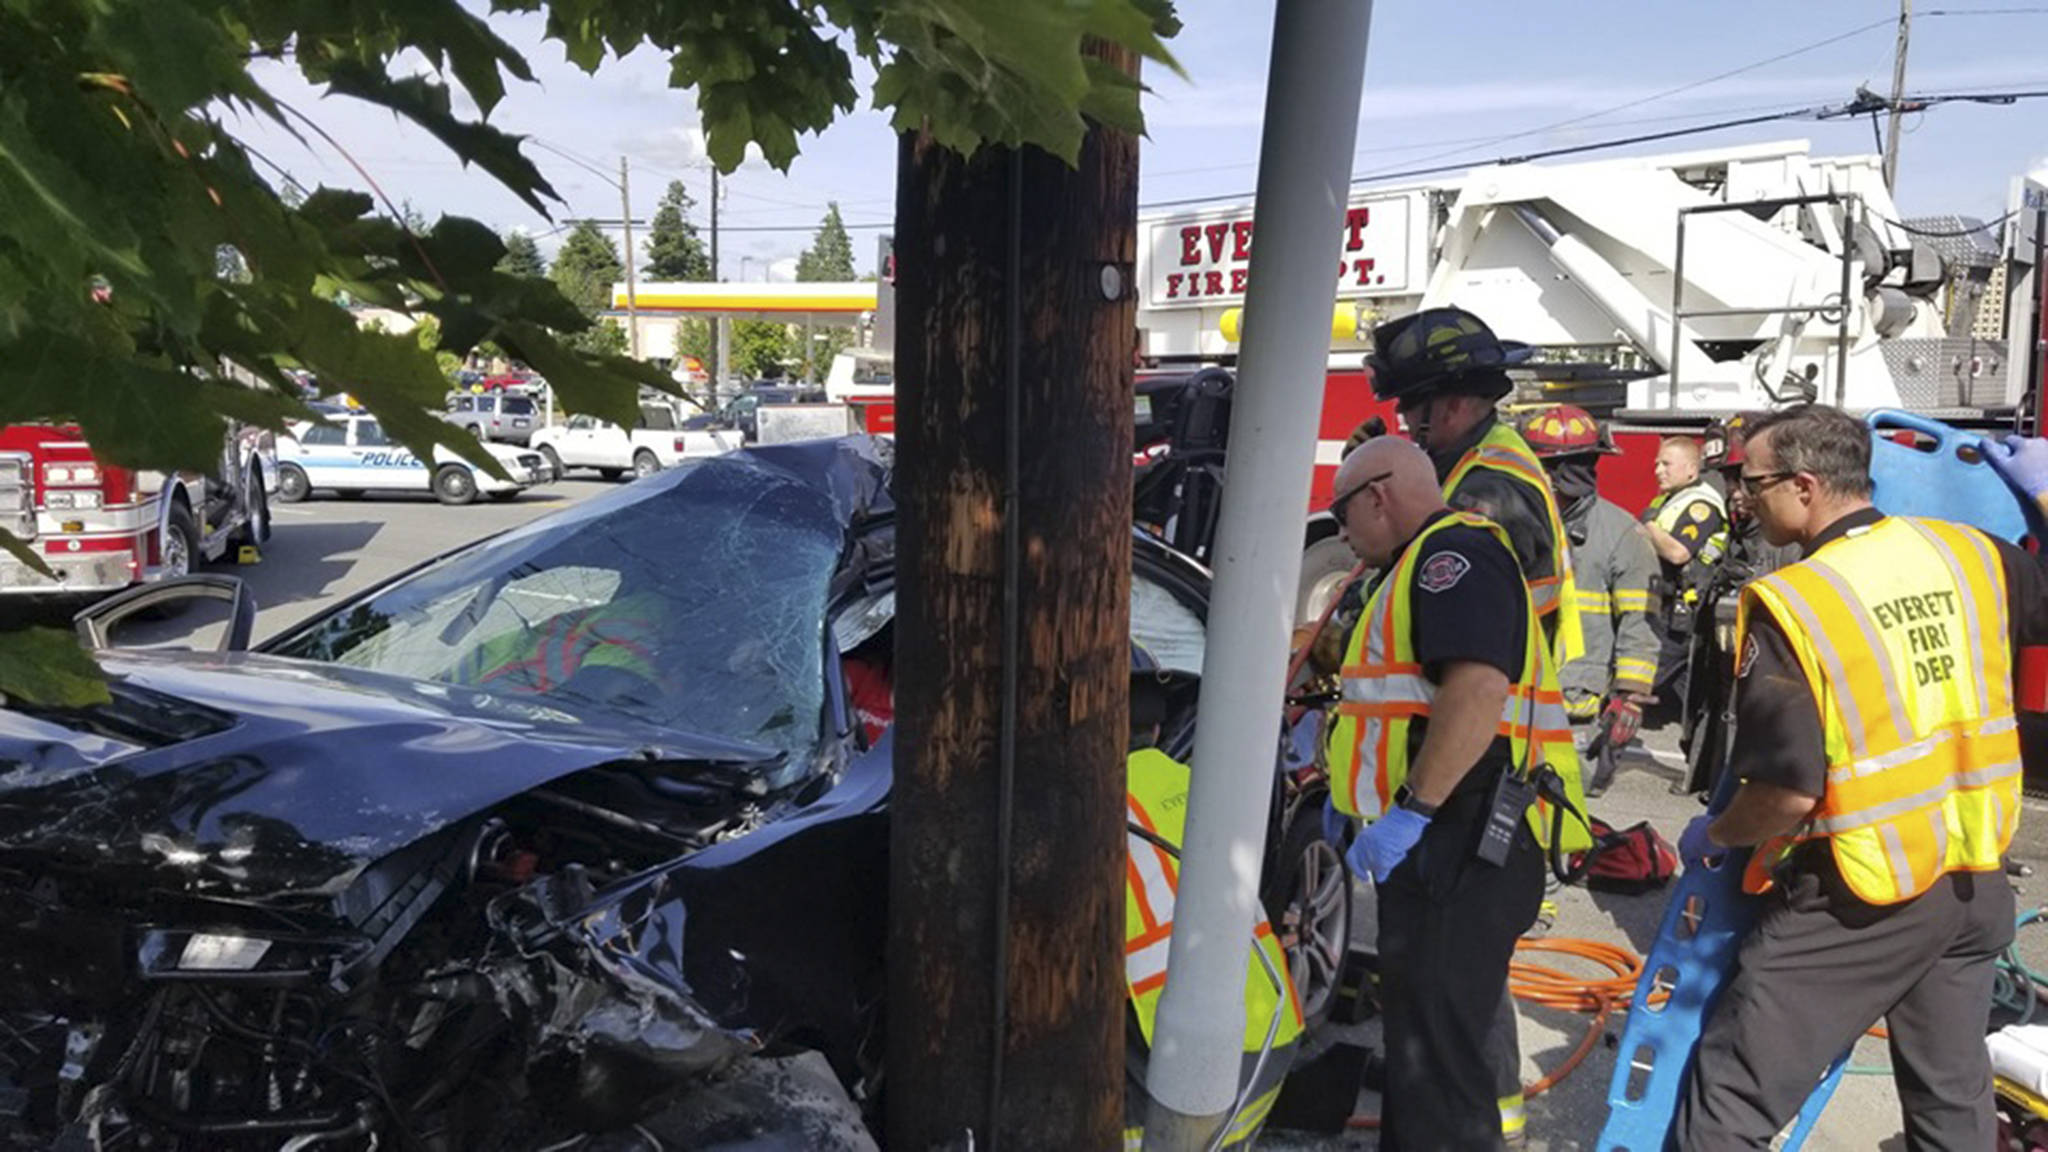 Two people were seriously injured after a multiple-car collision on Evergreen Way. (Everett Fire)